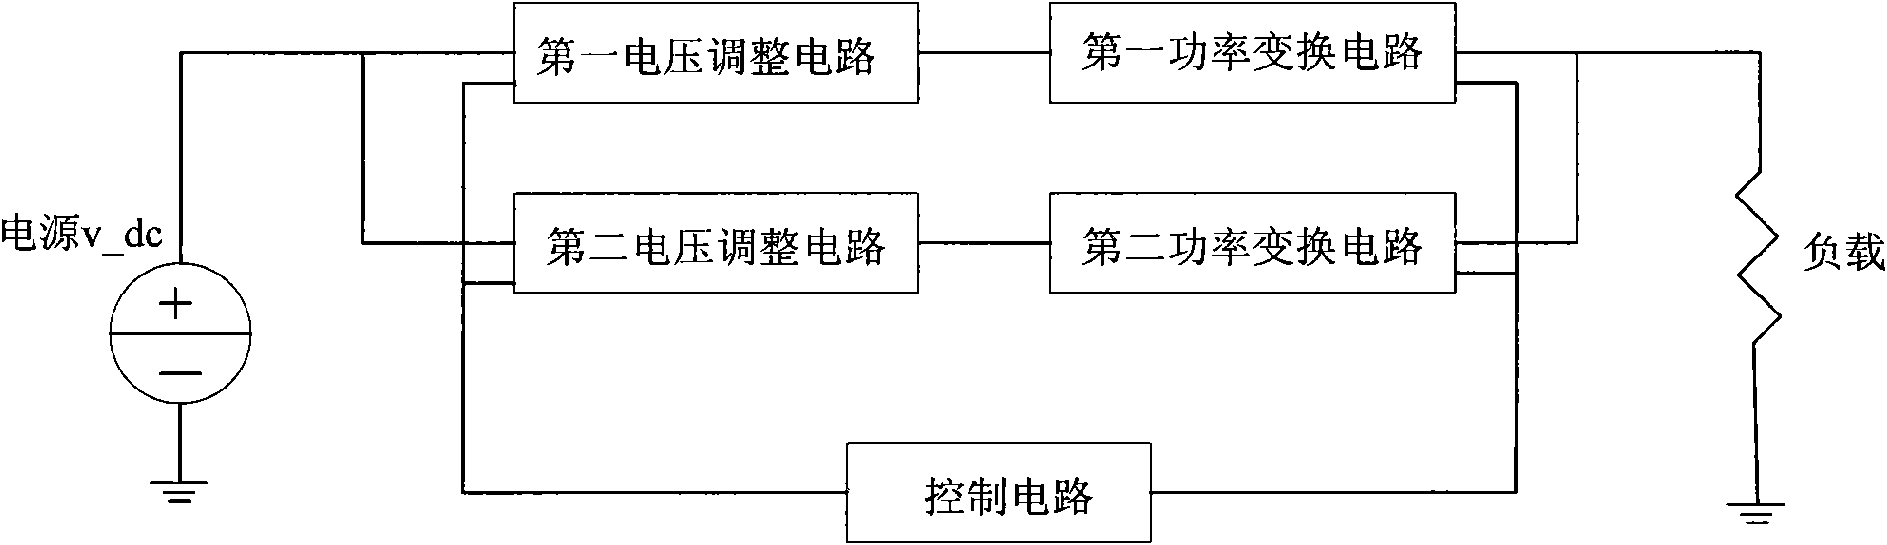 Power conversion units connected in parallel